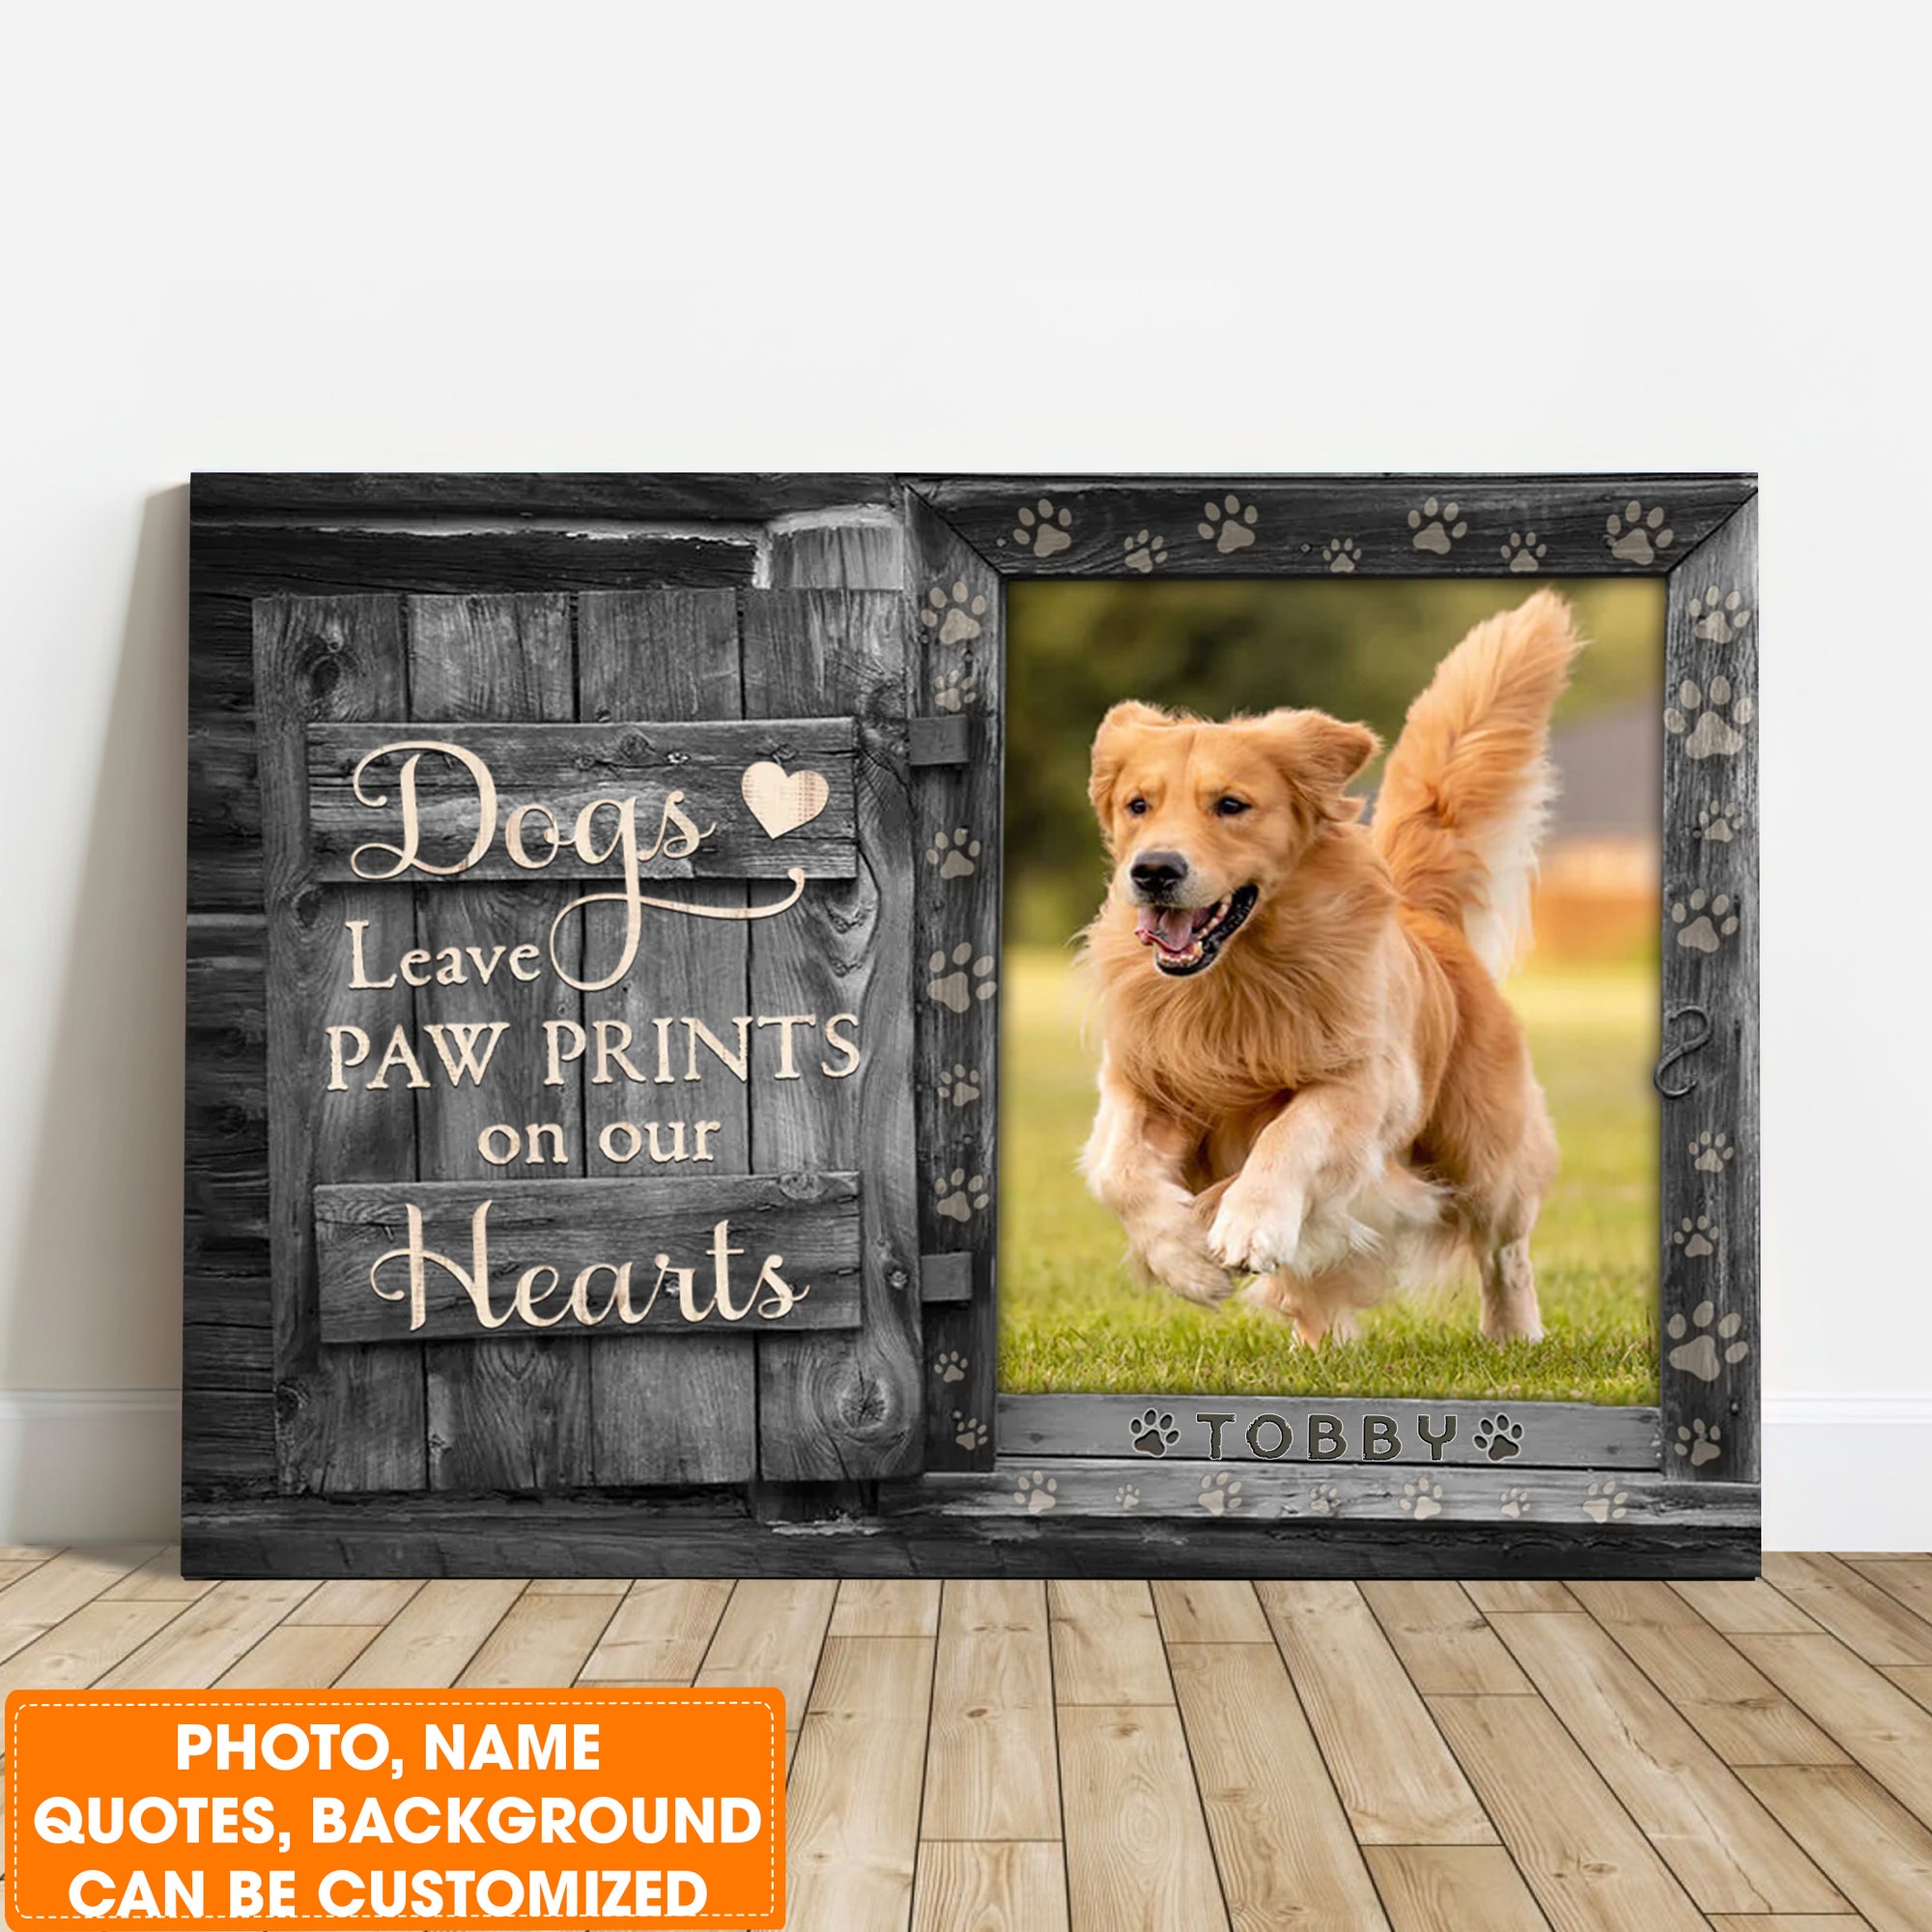 Personalized Dog Landscape Canvas, Custom Pet Photo, Pet Name For Your Hairy friend, Perfect Gift For Dog Lovers, Friend, Family